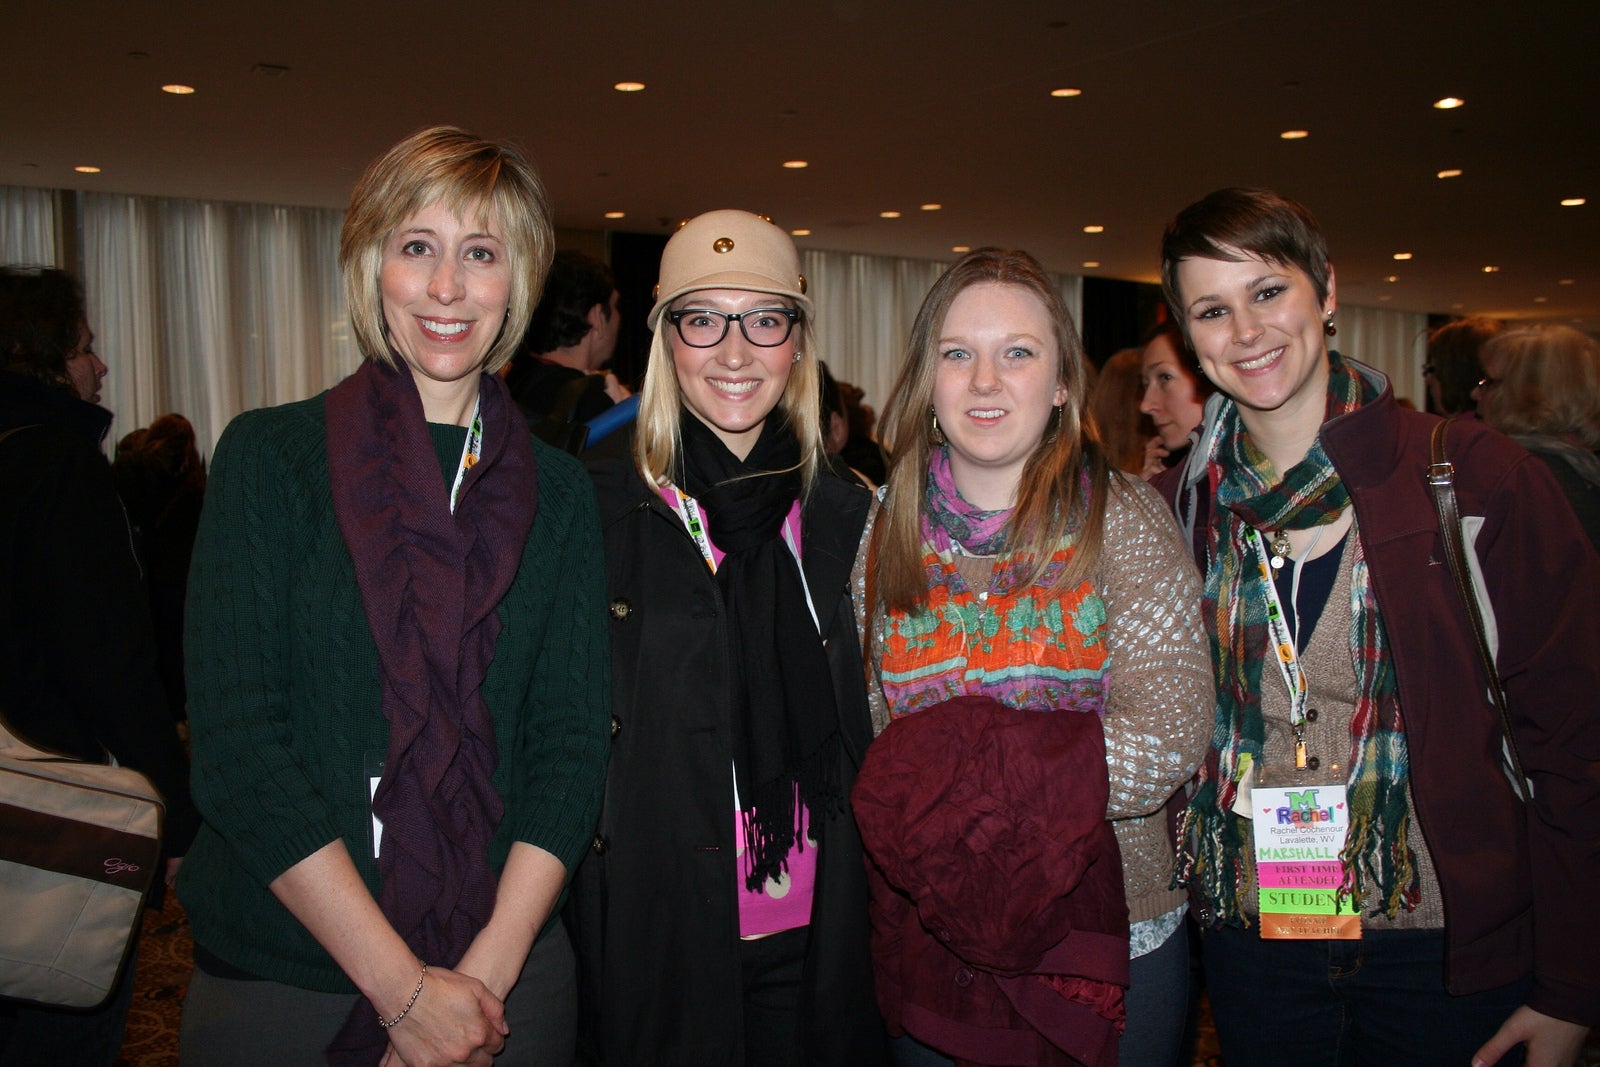 Professor Maribea Barnes with students at an Art Education conference.